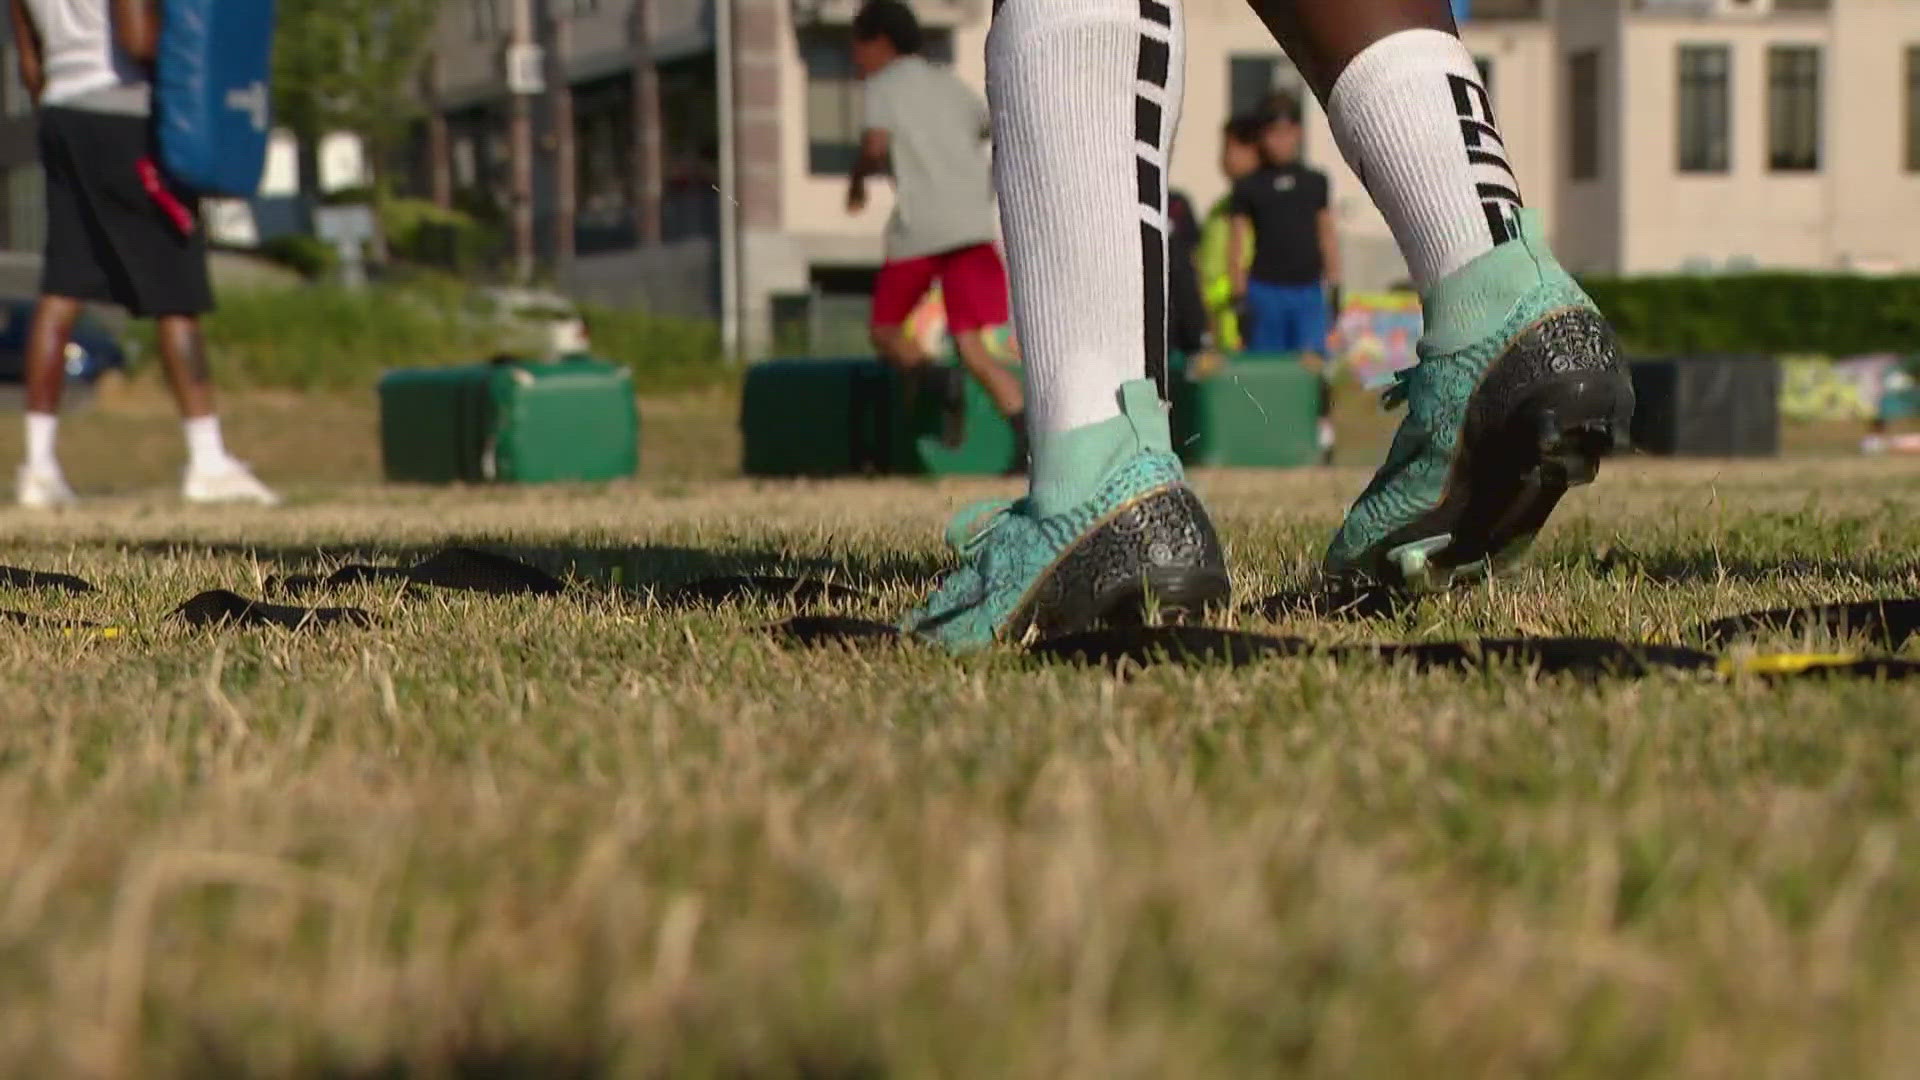 Artificial turf has multiple negative impacts on the environment, so scientists are hoping to make real grass more accessible to more people.